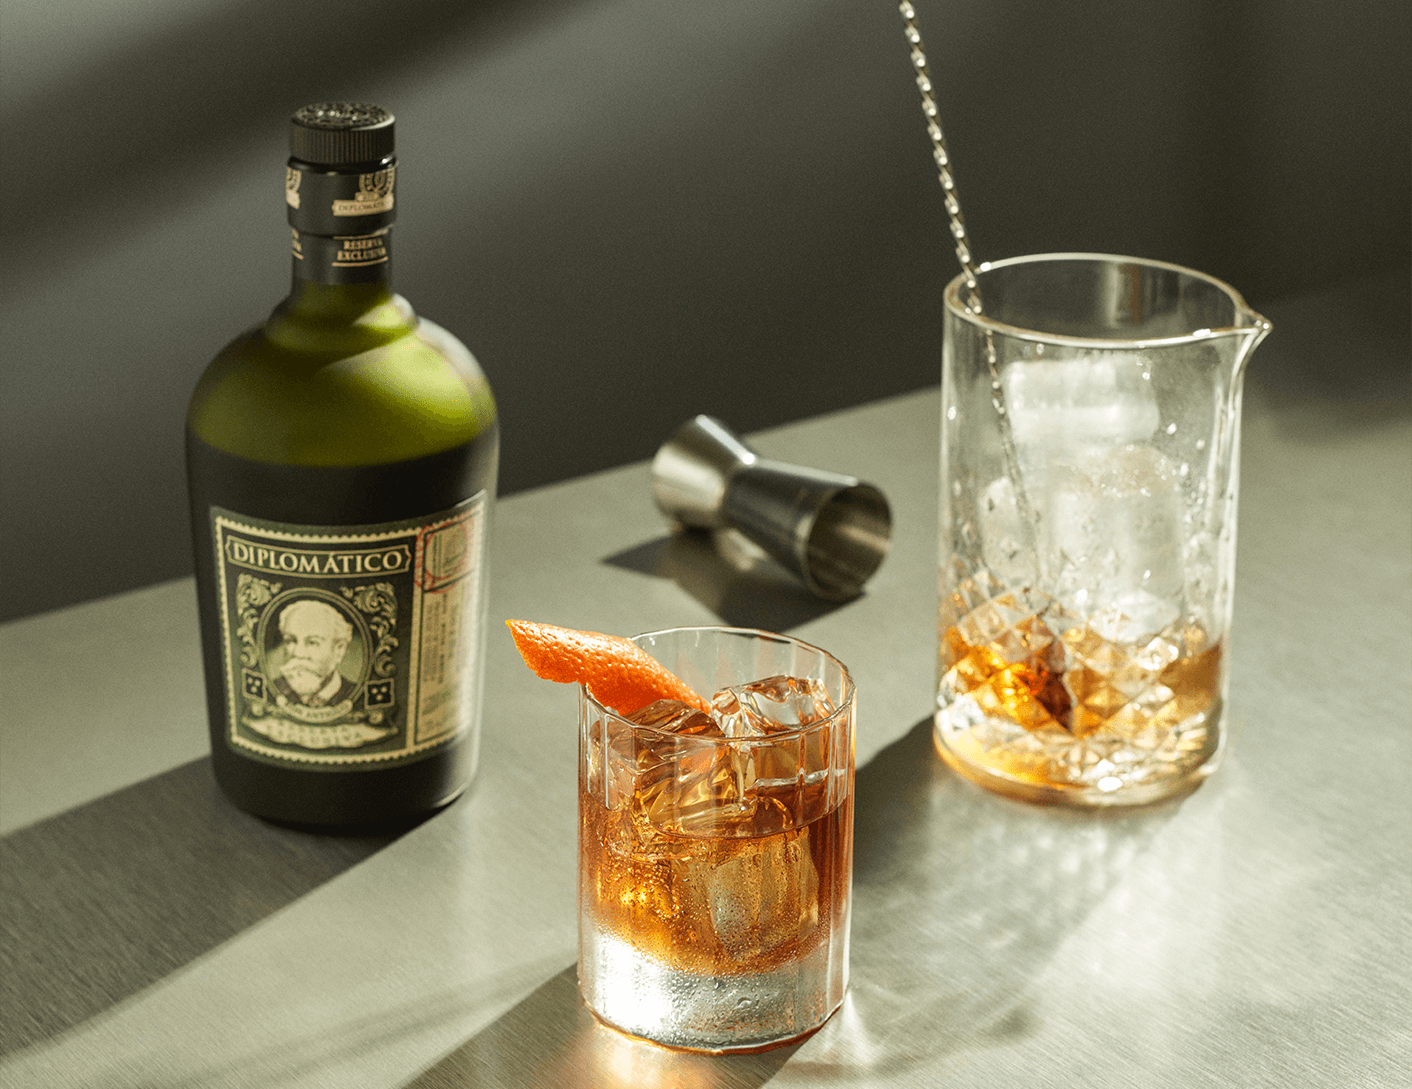 Diplomatico Rum: Warm-up With These Cool Cocktails –